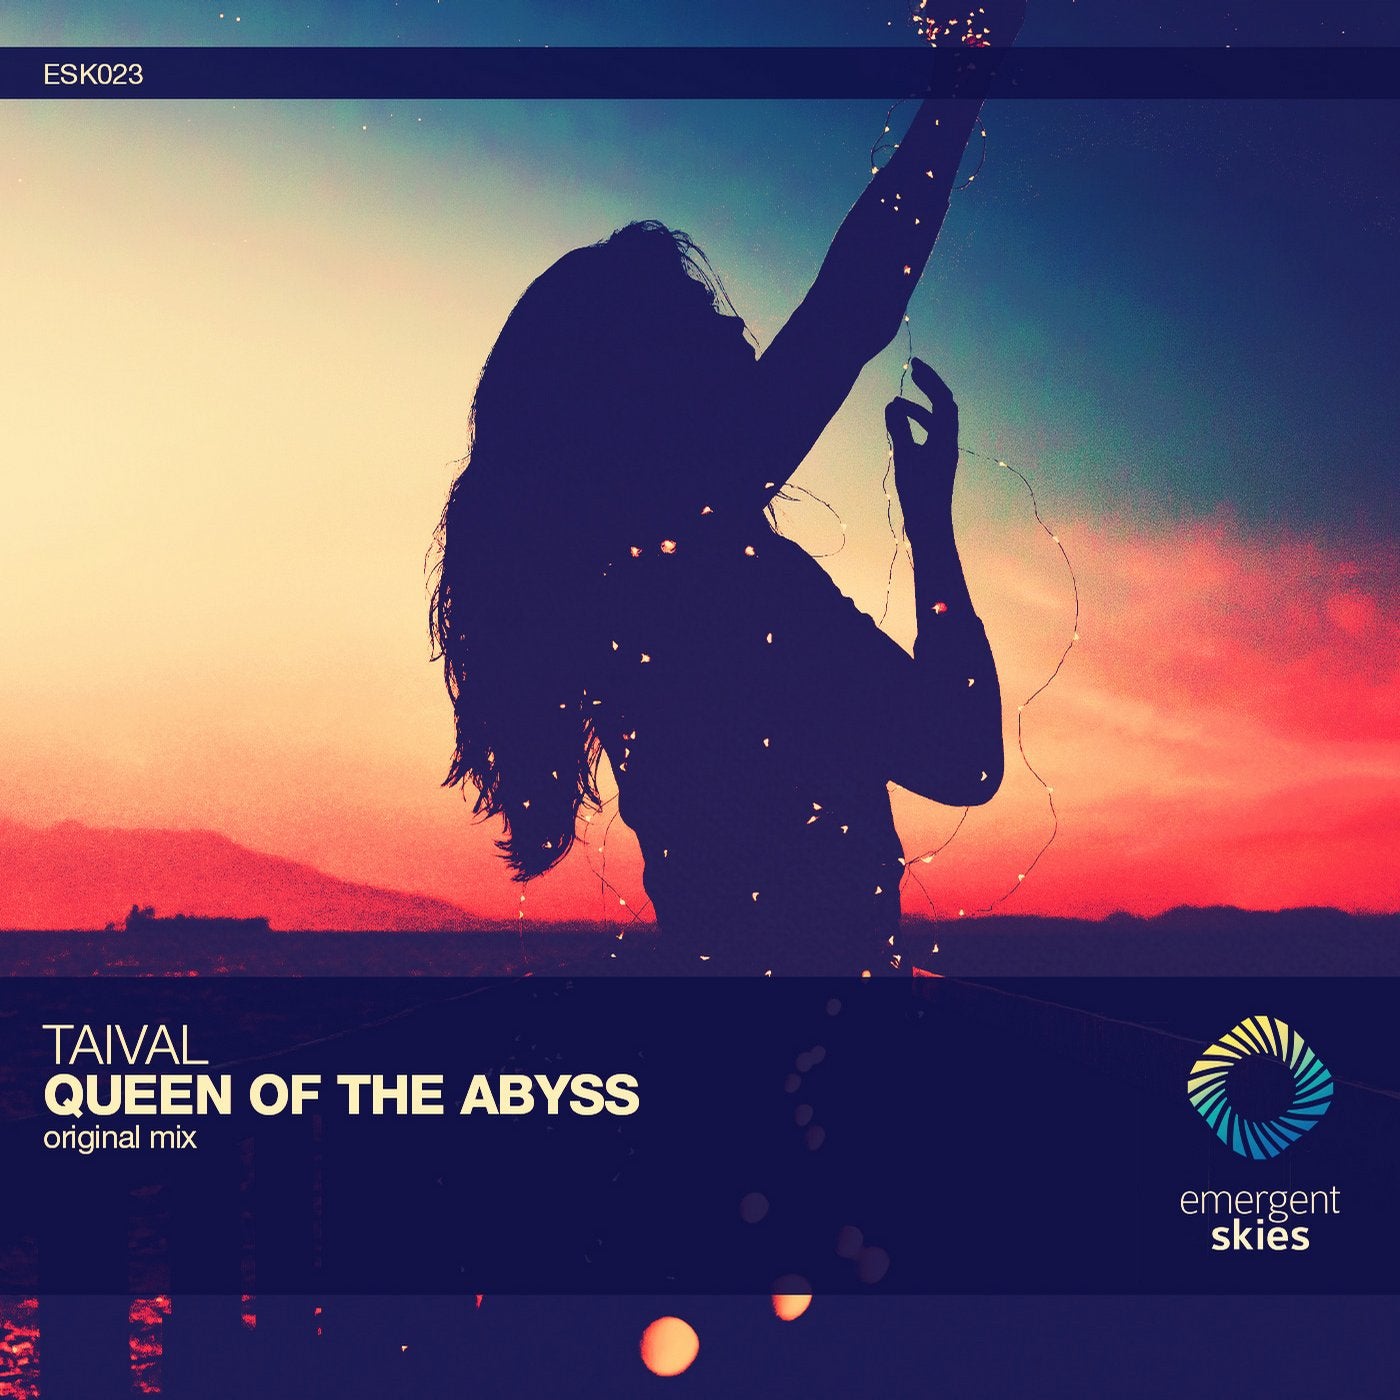 Queen of the Abyss